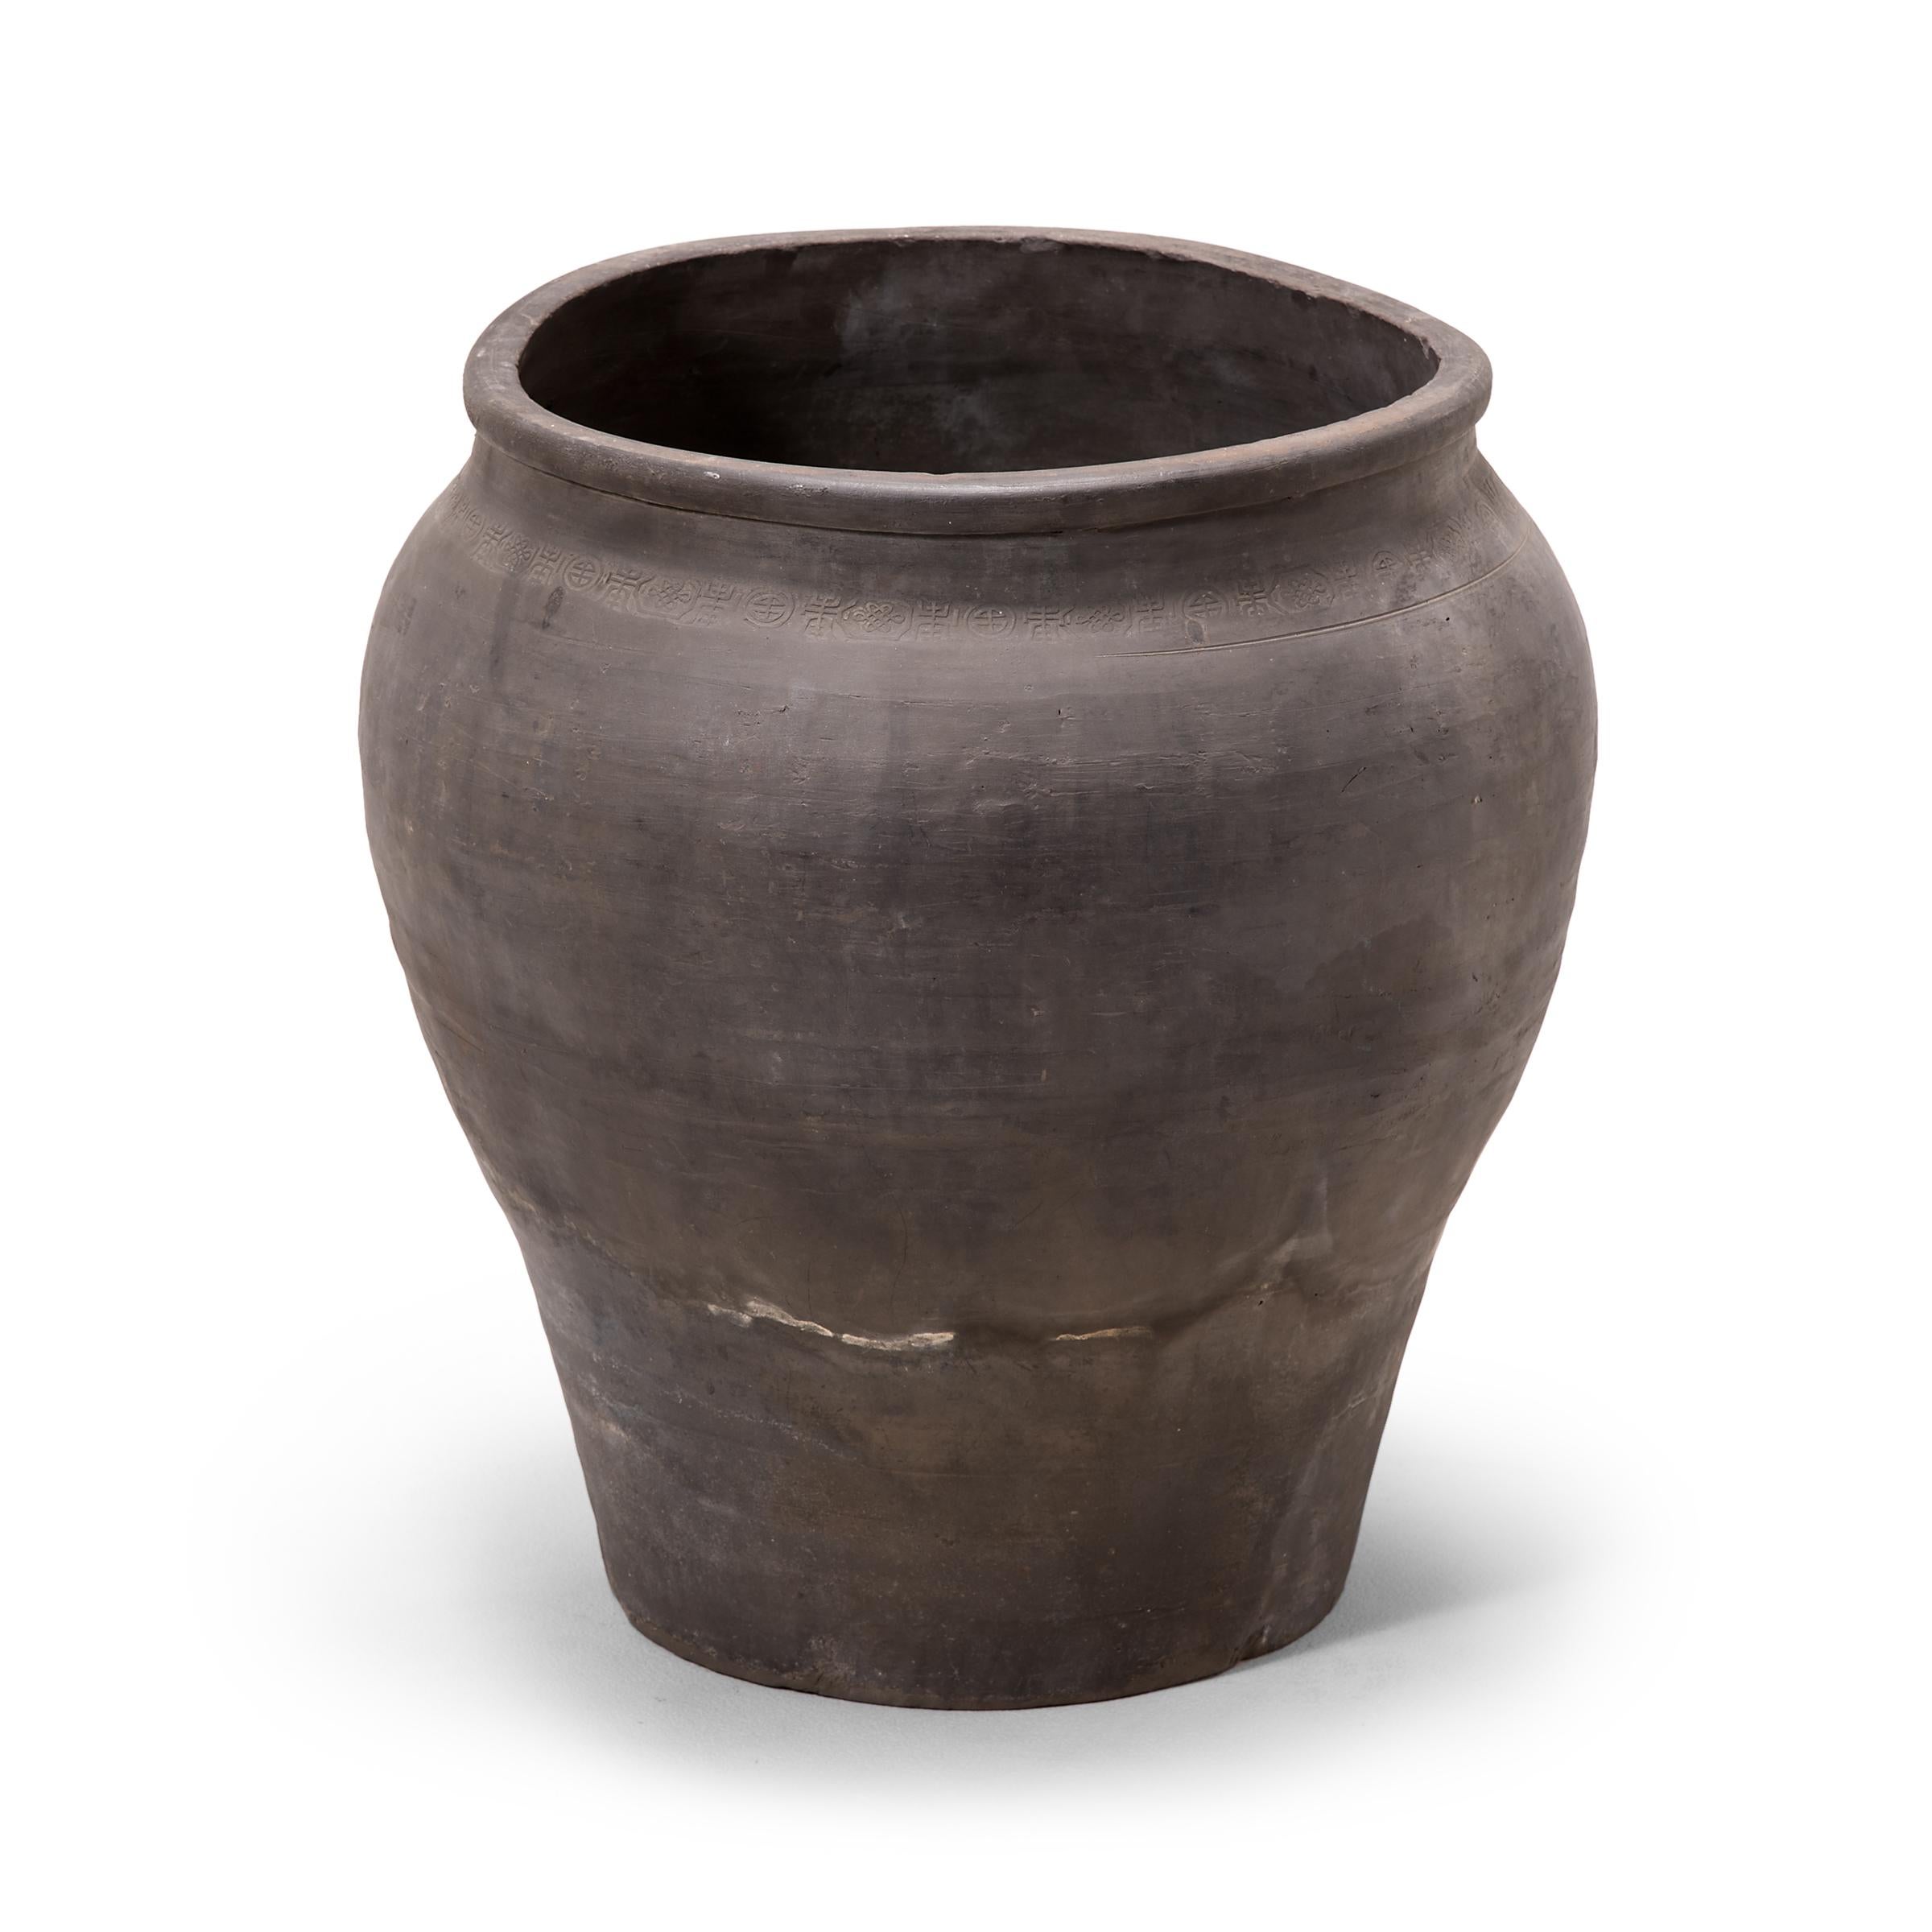 Charged with the humble task of storing dry goods, this capacious earthenware jar is distinguished by its tapered form and beautifully irregular unglazed surface. Smoke from the kiln gives the vessel its depth of color, transitioning gradually from